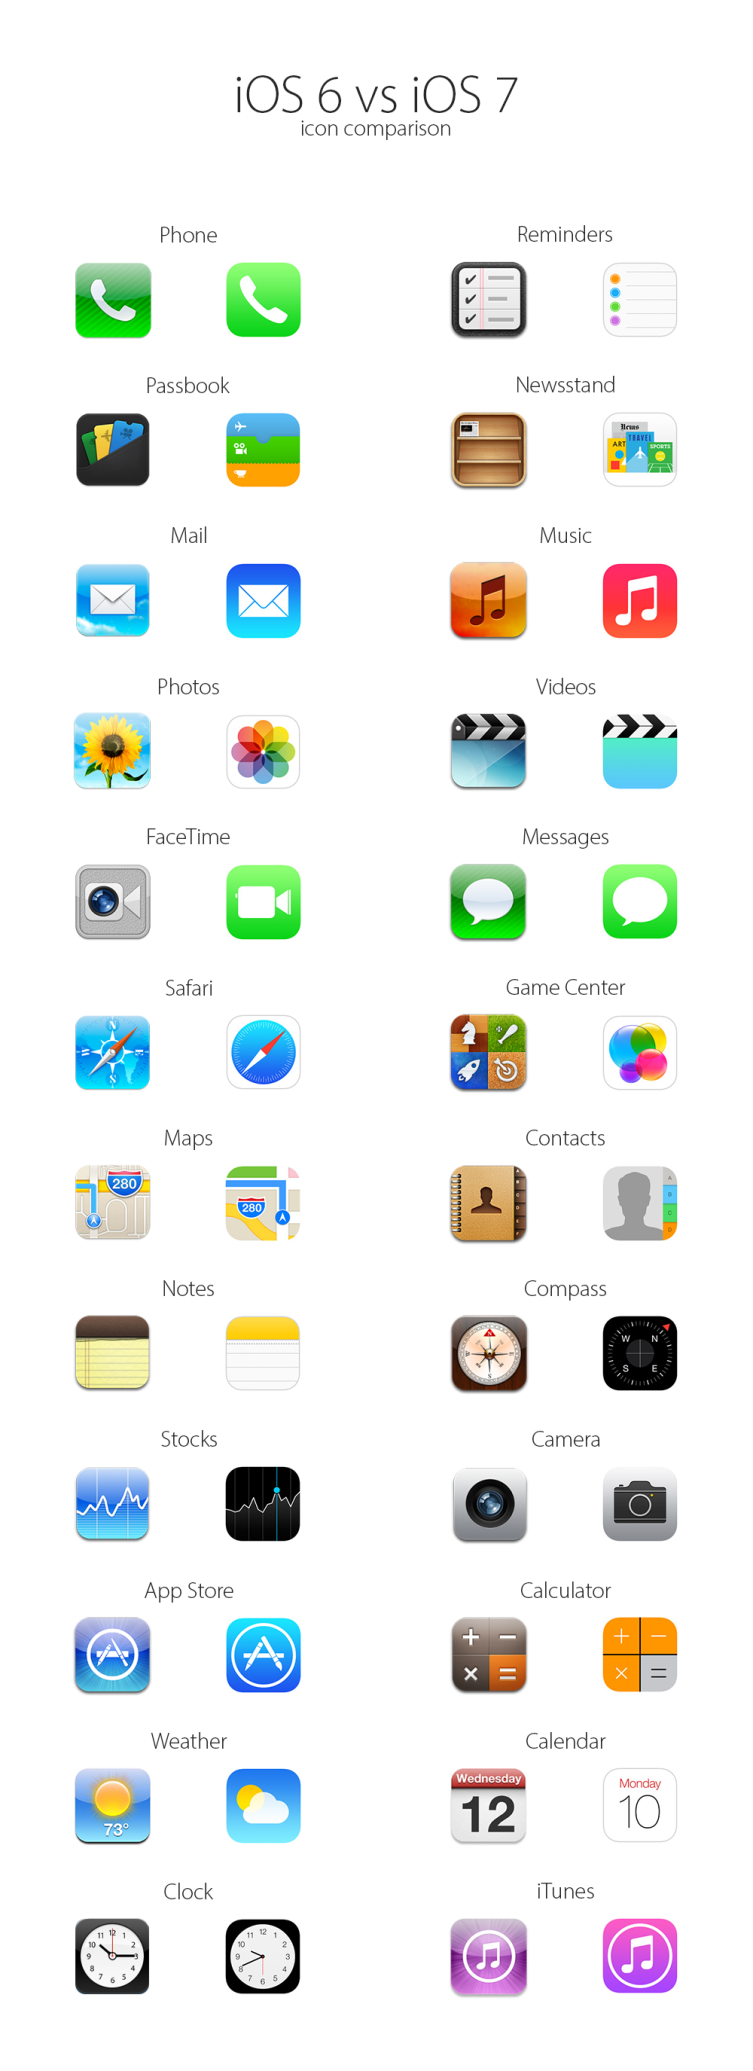 ios6vsios7_icons.png